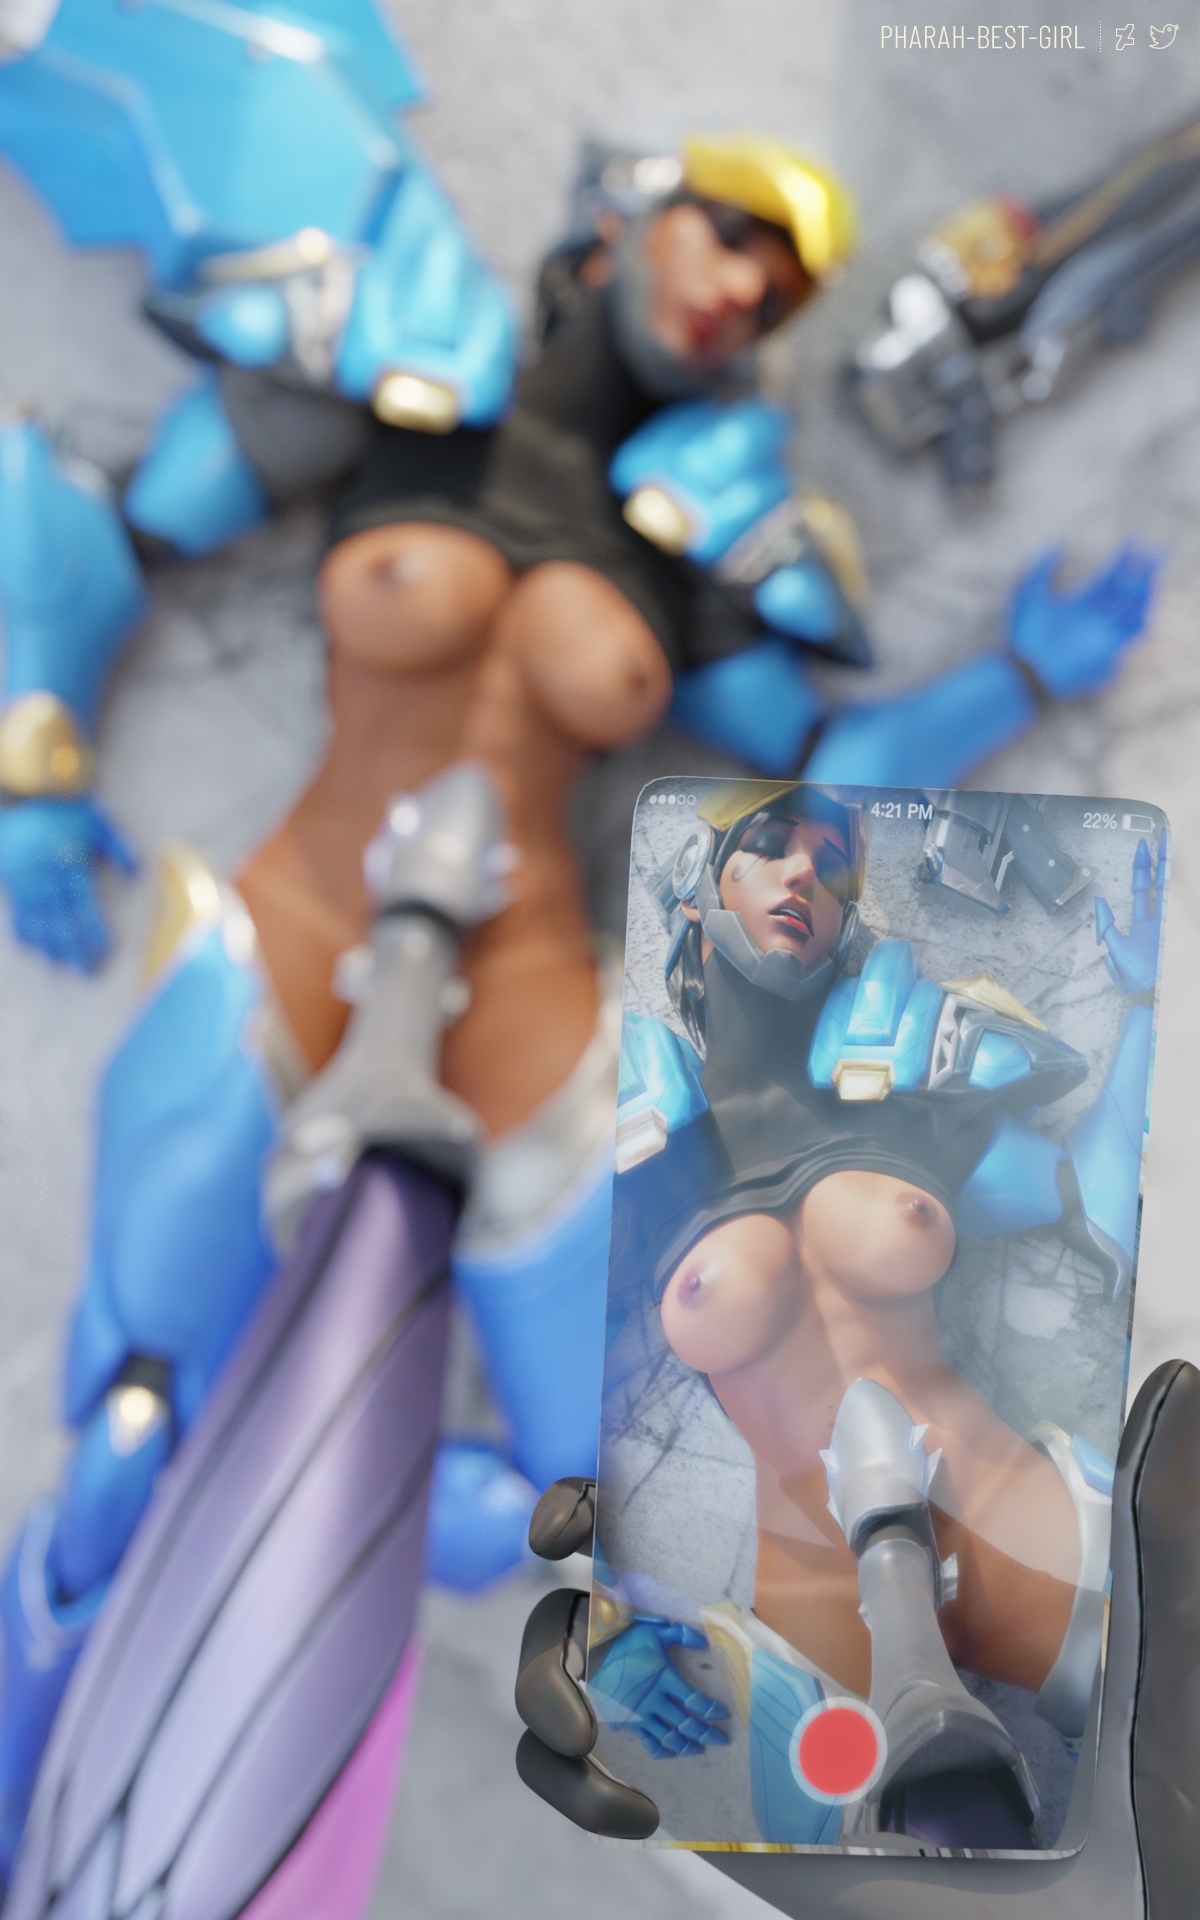 Defeated v7 Pharah Overwatch 3d Porn Sexy Nude Boobs Natural Tits Abs Pussy